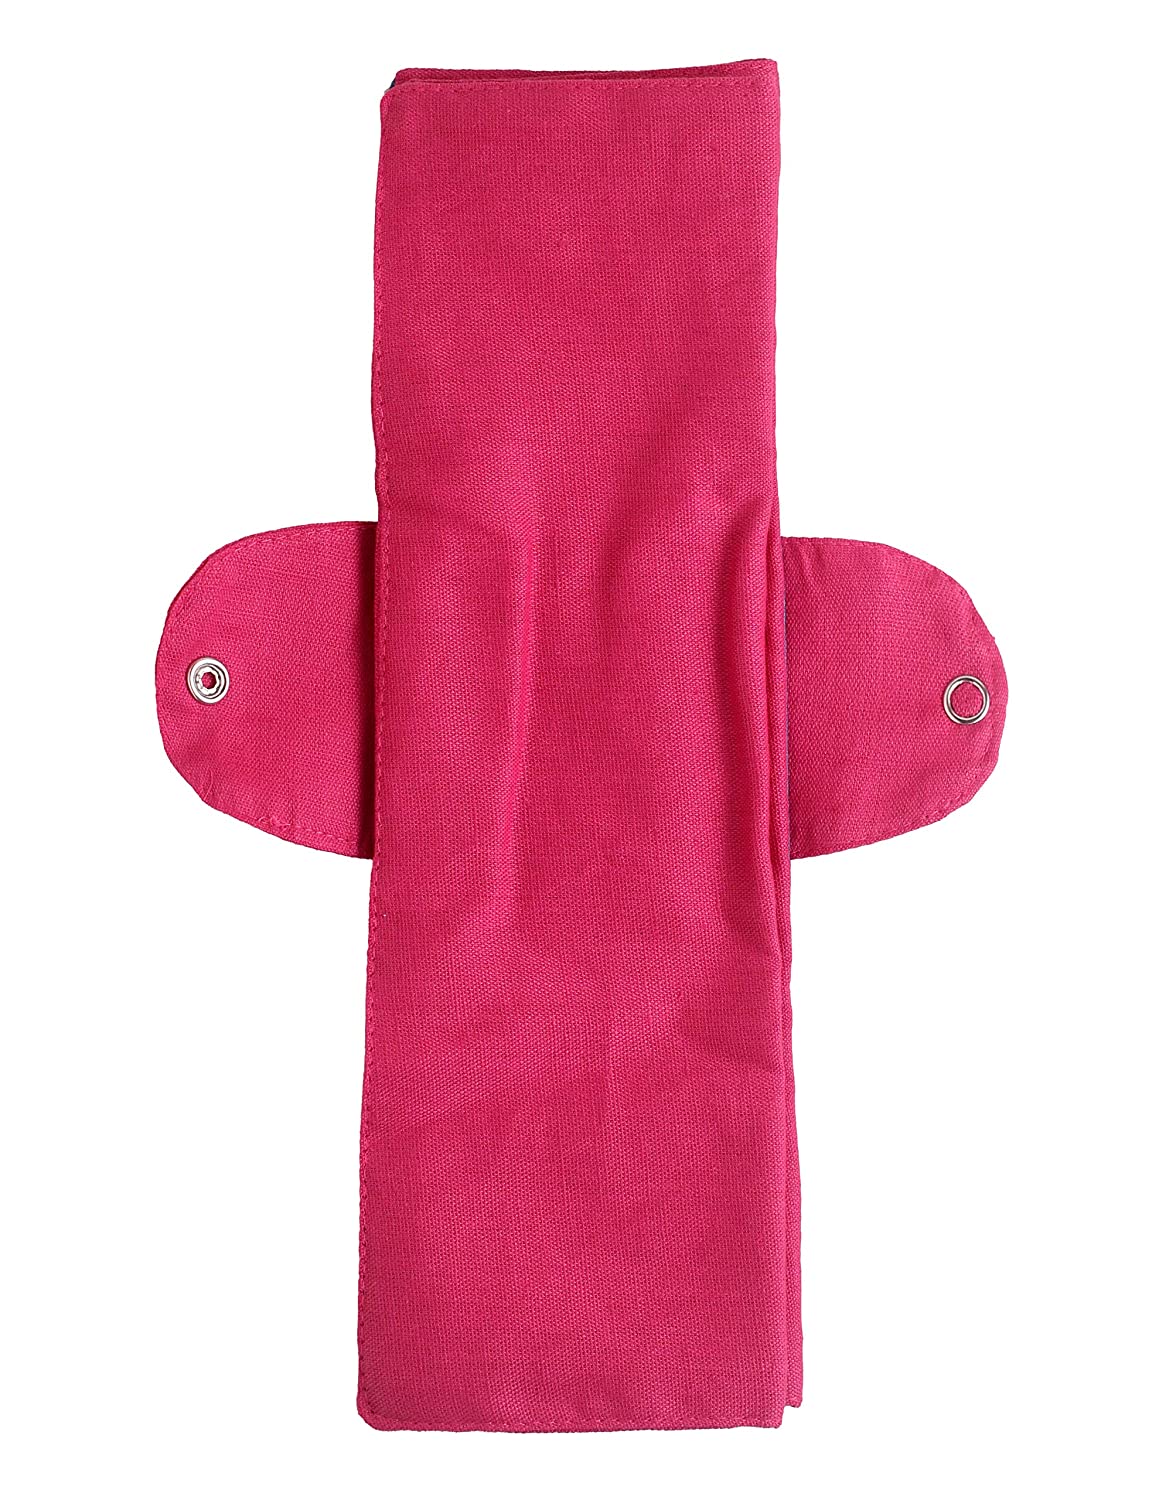 Reusable Foldable Cloth Pads - Pack of 2